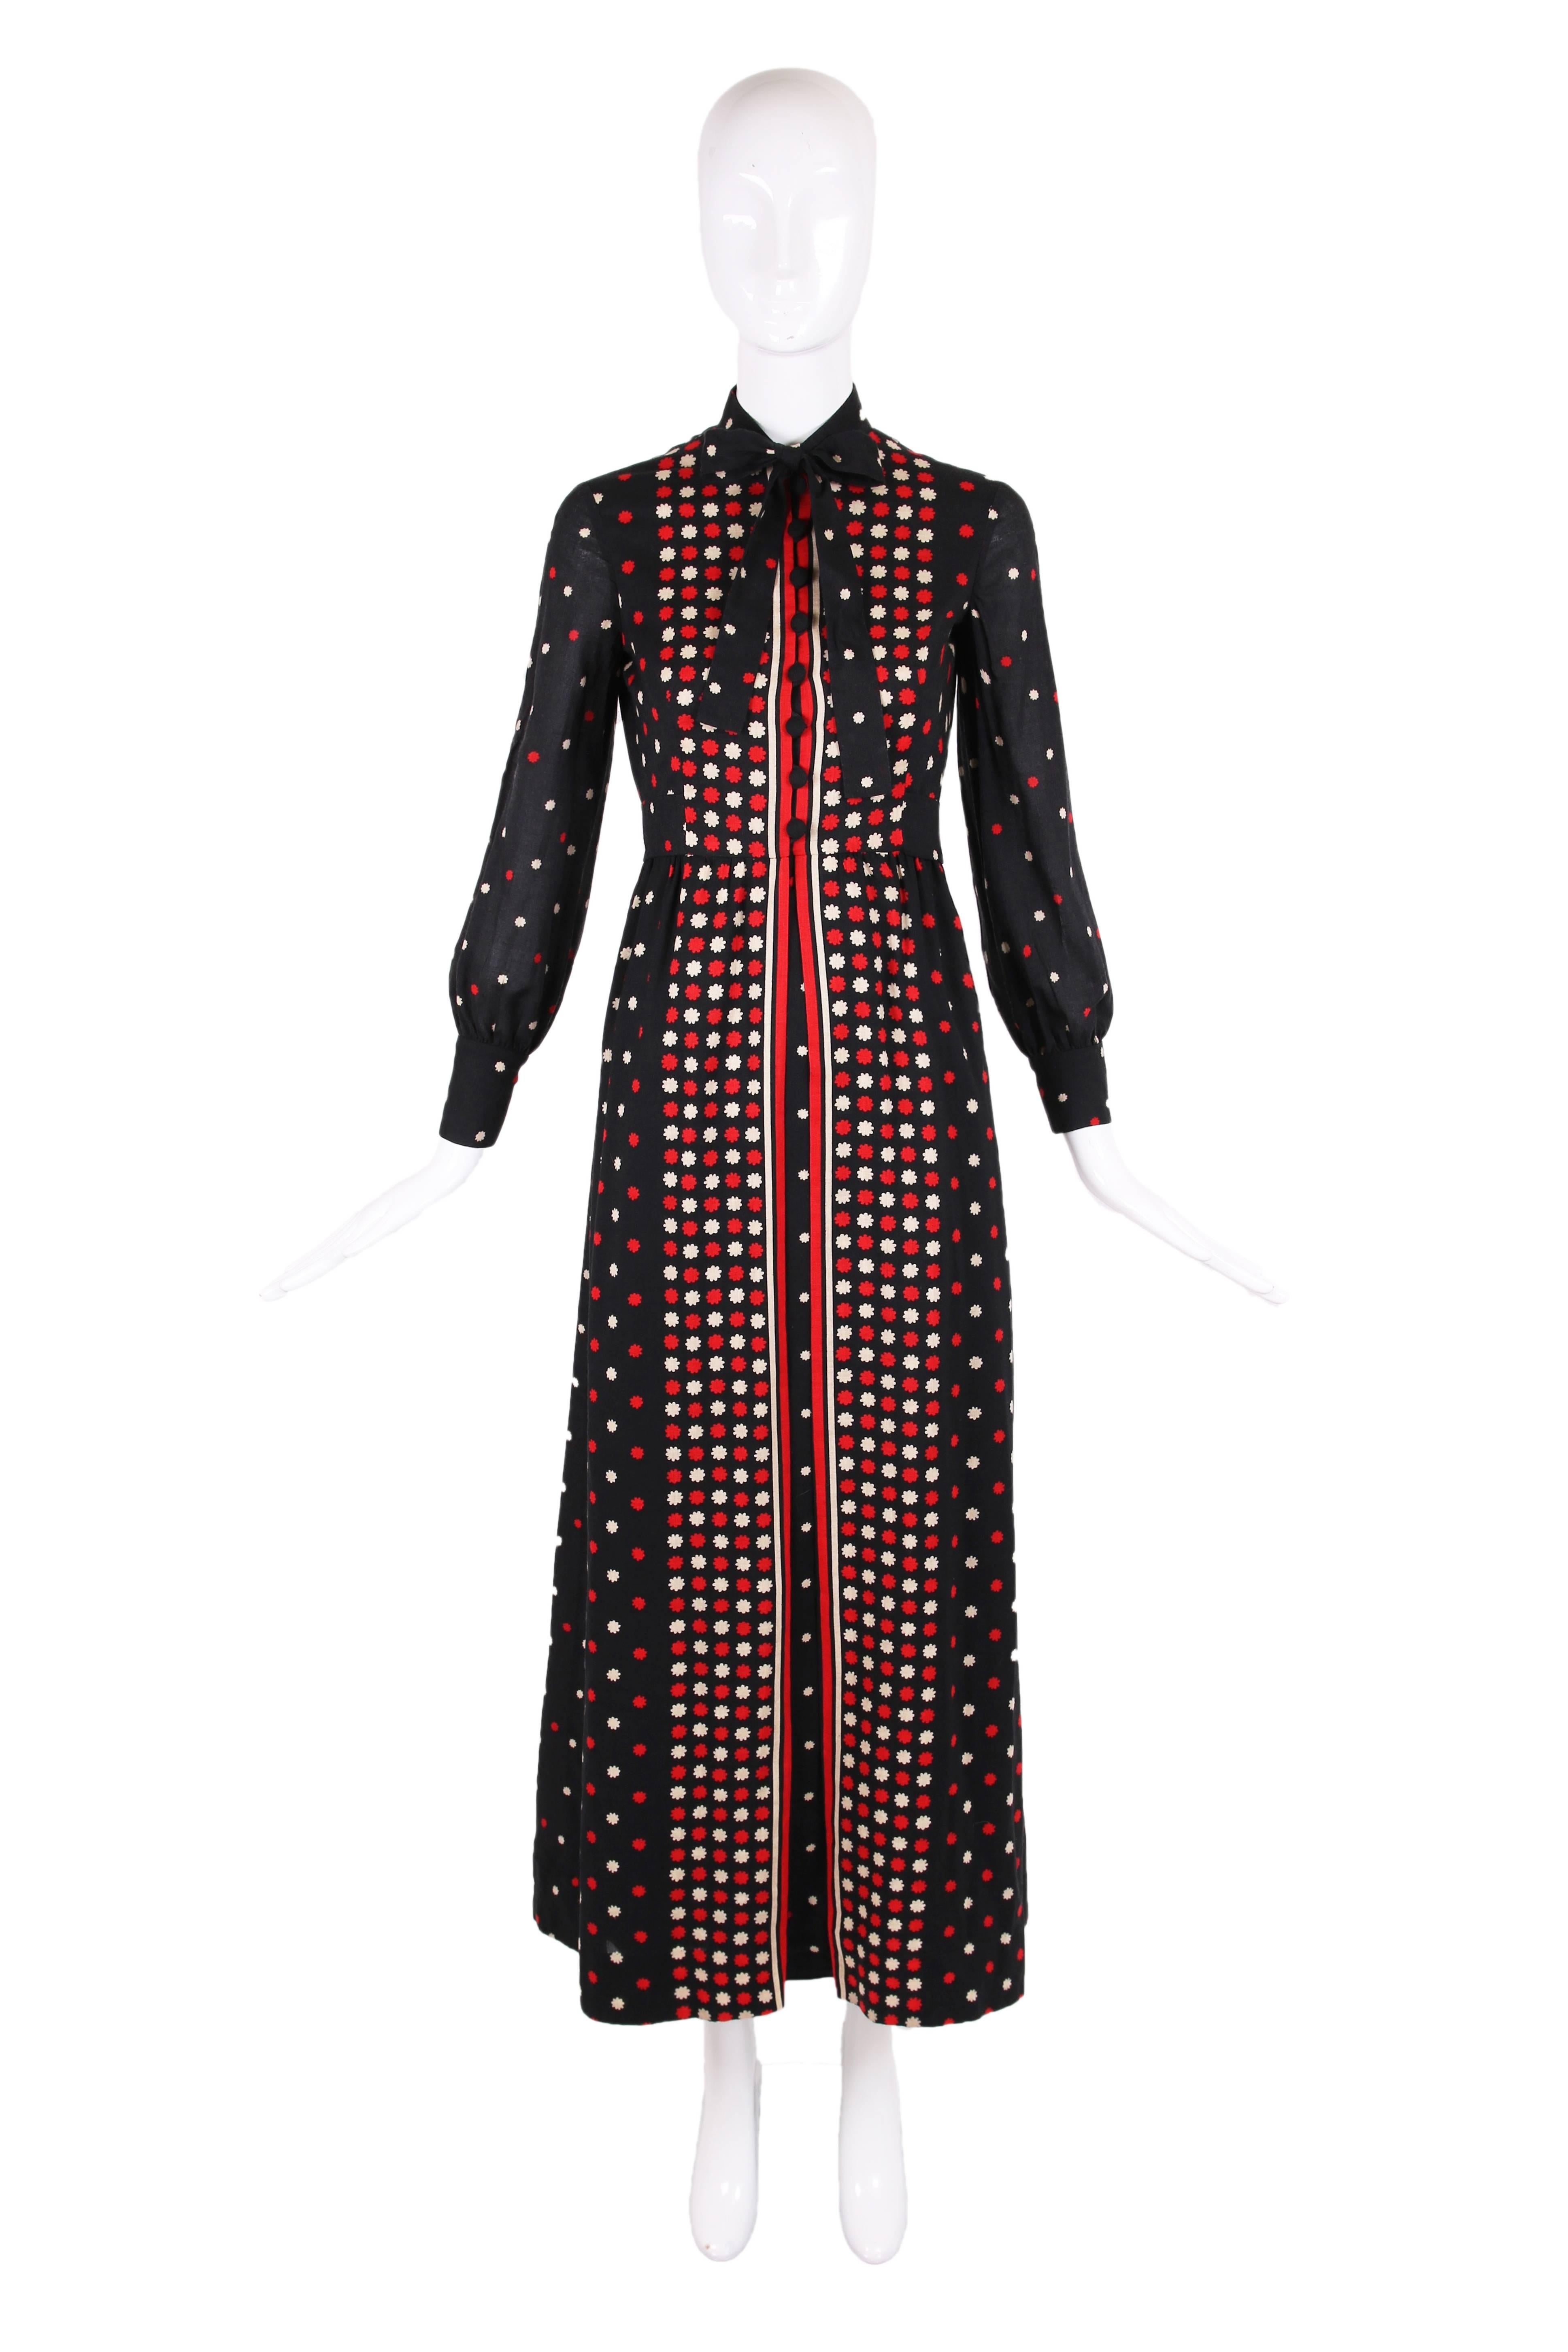 1970's Geoffrey Been black lightweight wool maxi dress with red and white abstract floral print. Features neckties, buttons down the bodice front and sleeves, an opening down the skirt front with a panel behind it and a slender A-line silhouette. In